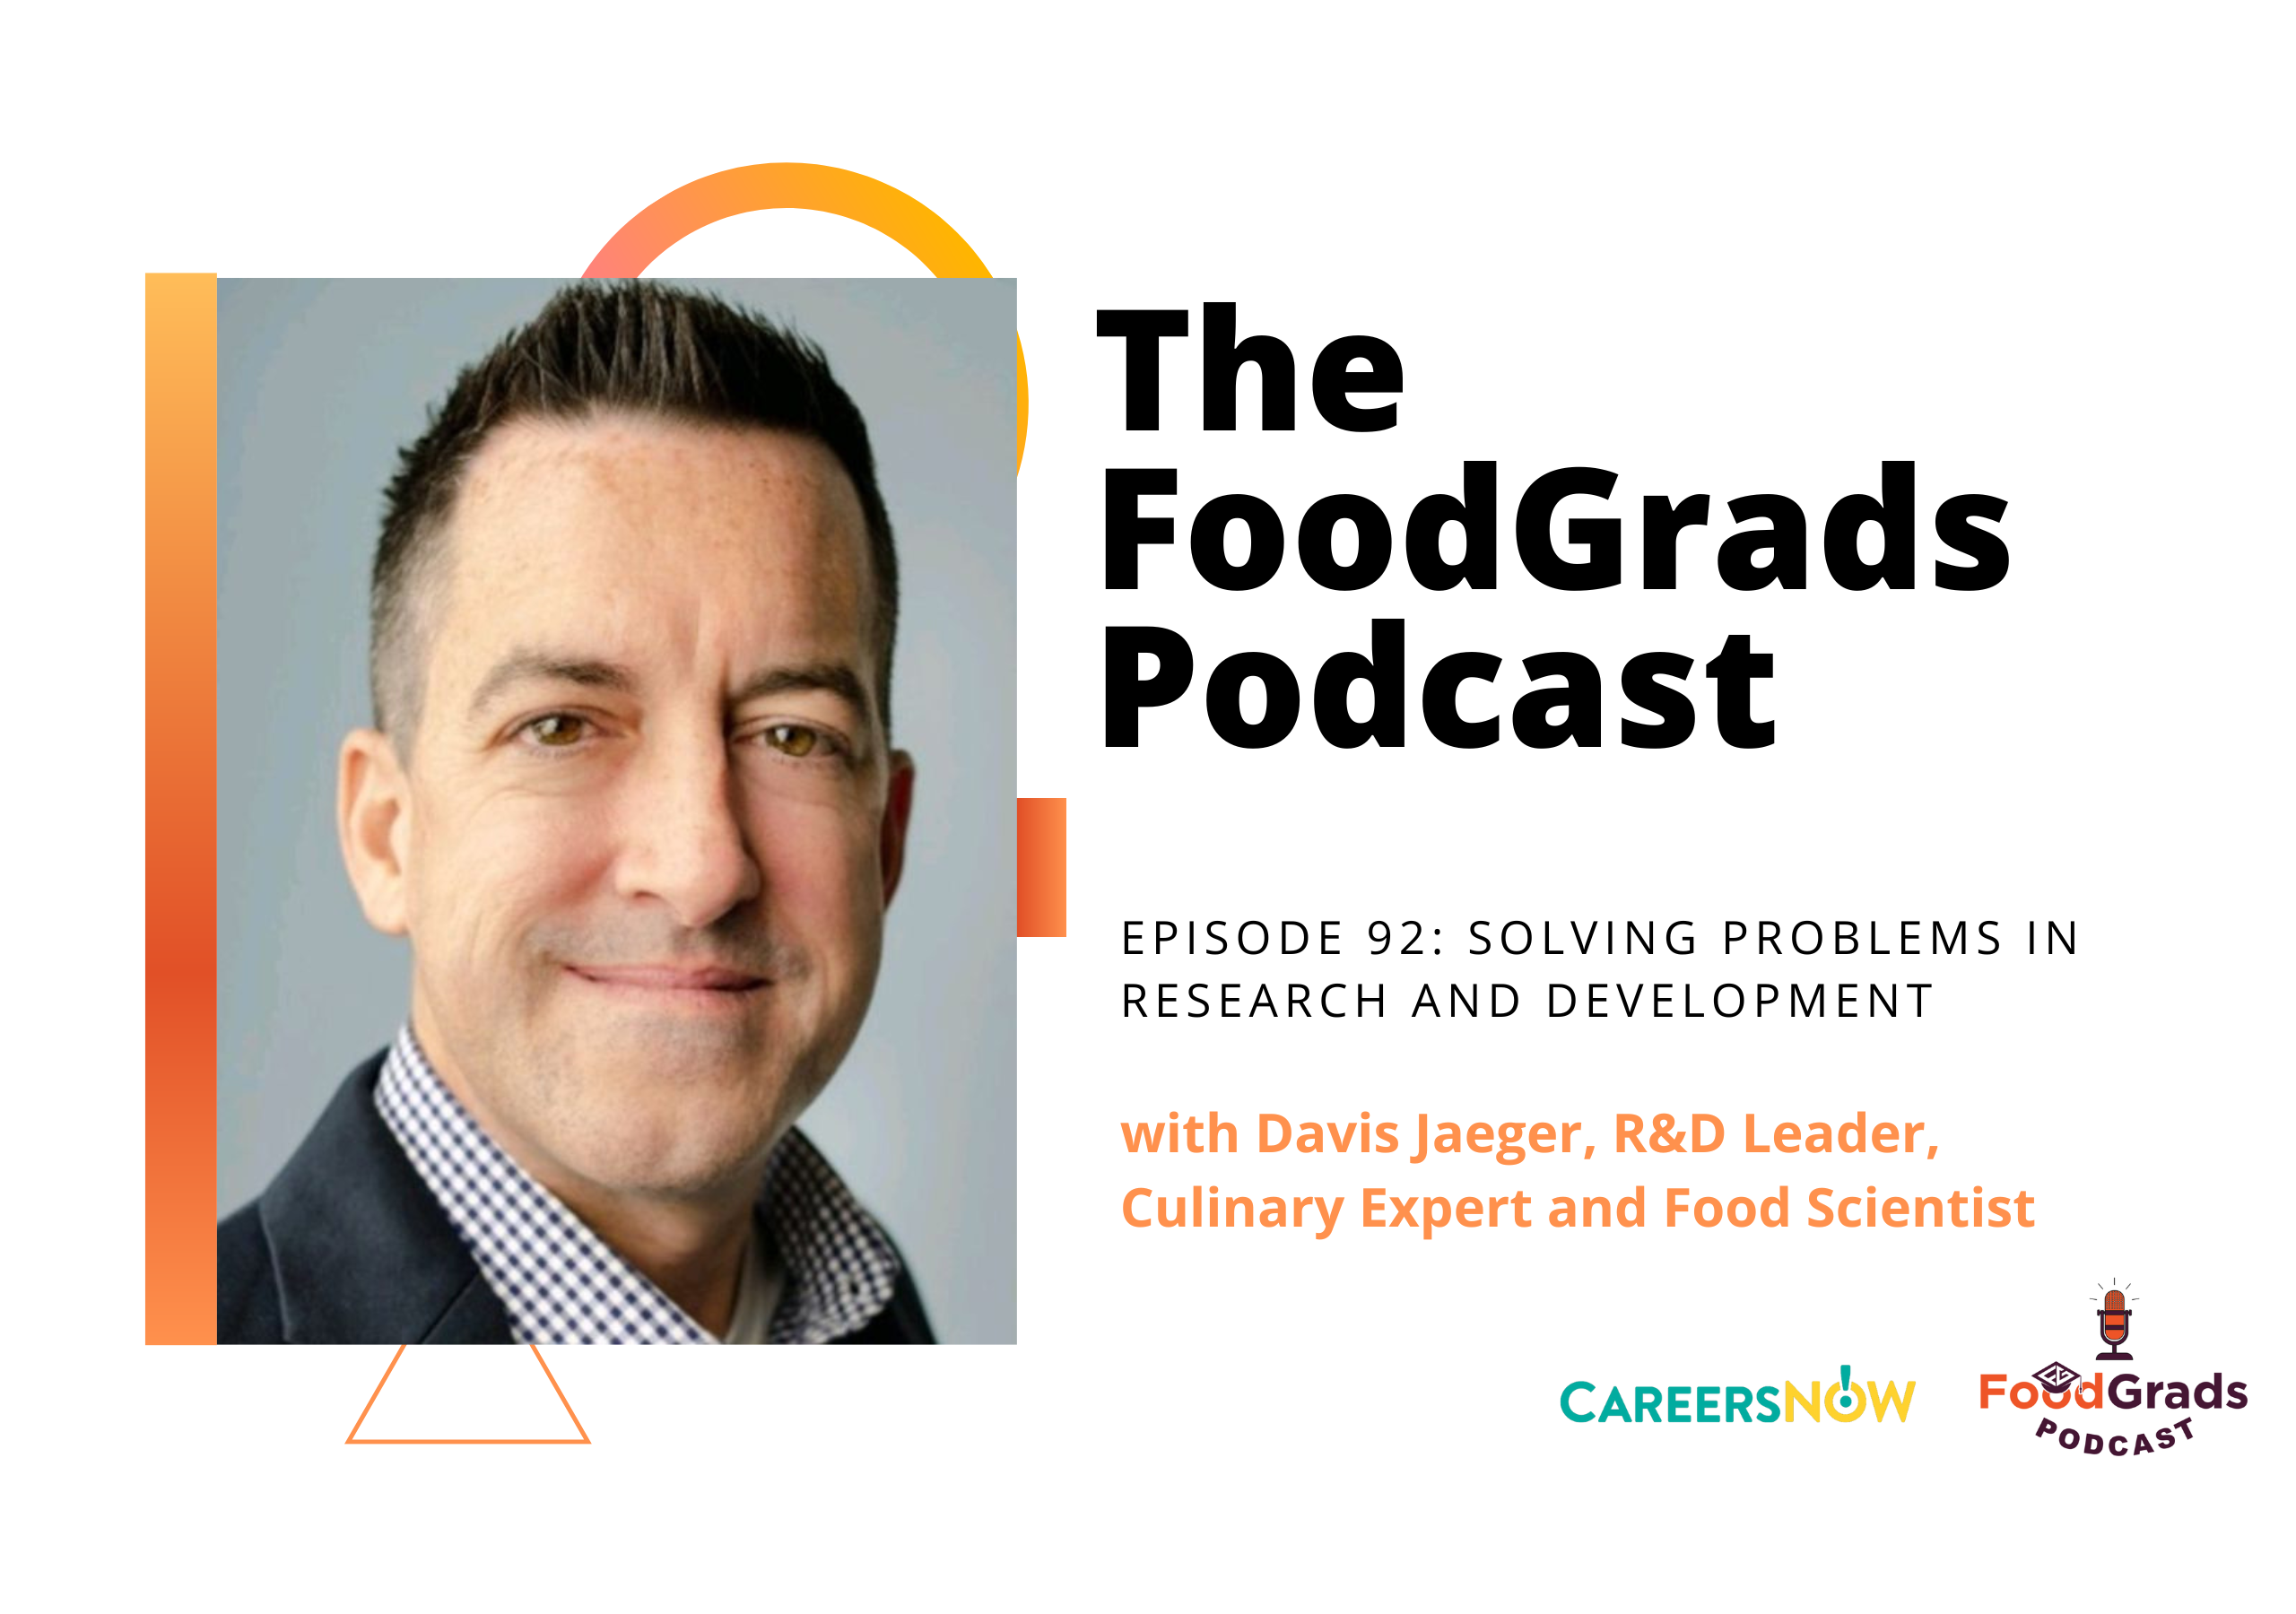 Davis Jaeger, R&D Leader, Culinary Expert and Food Scientist – Solving R&D problems (#92)